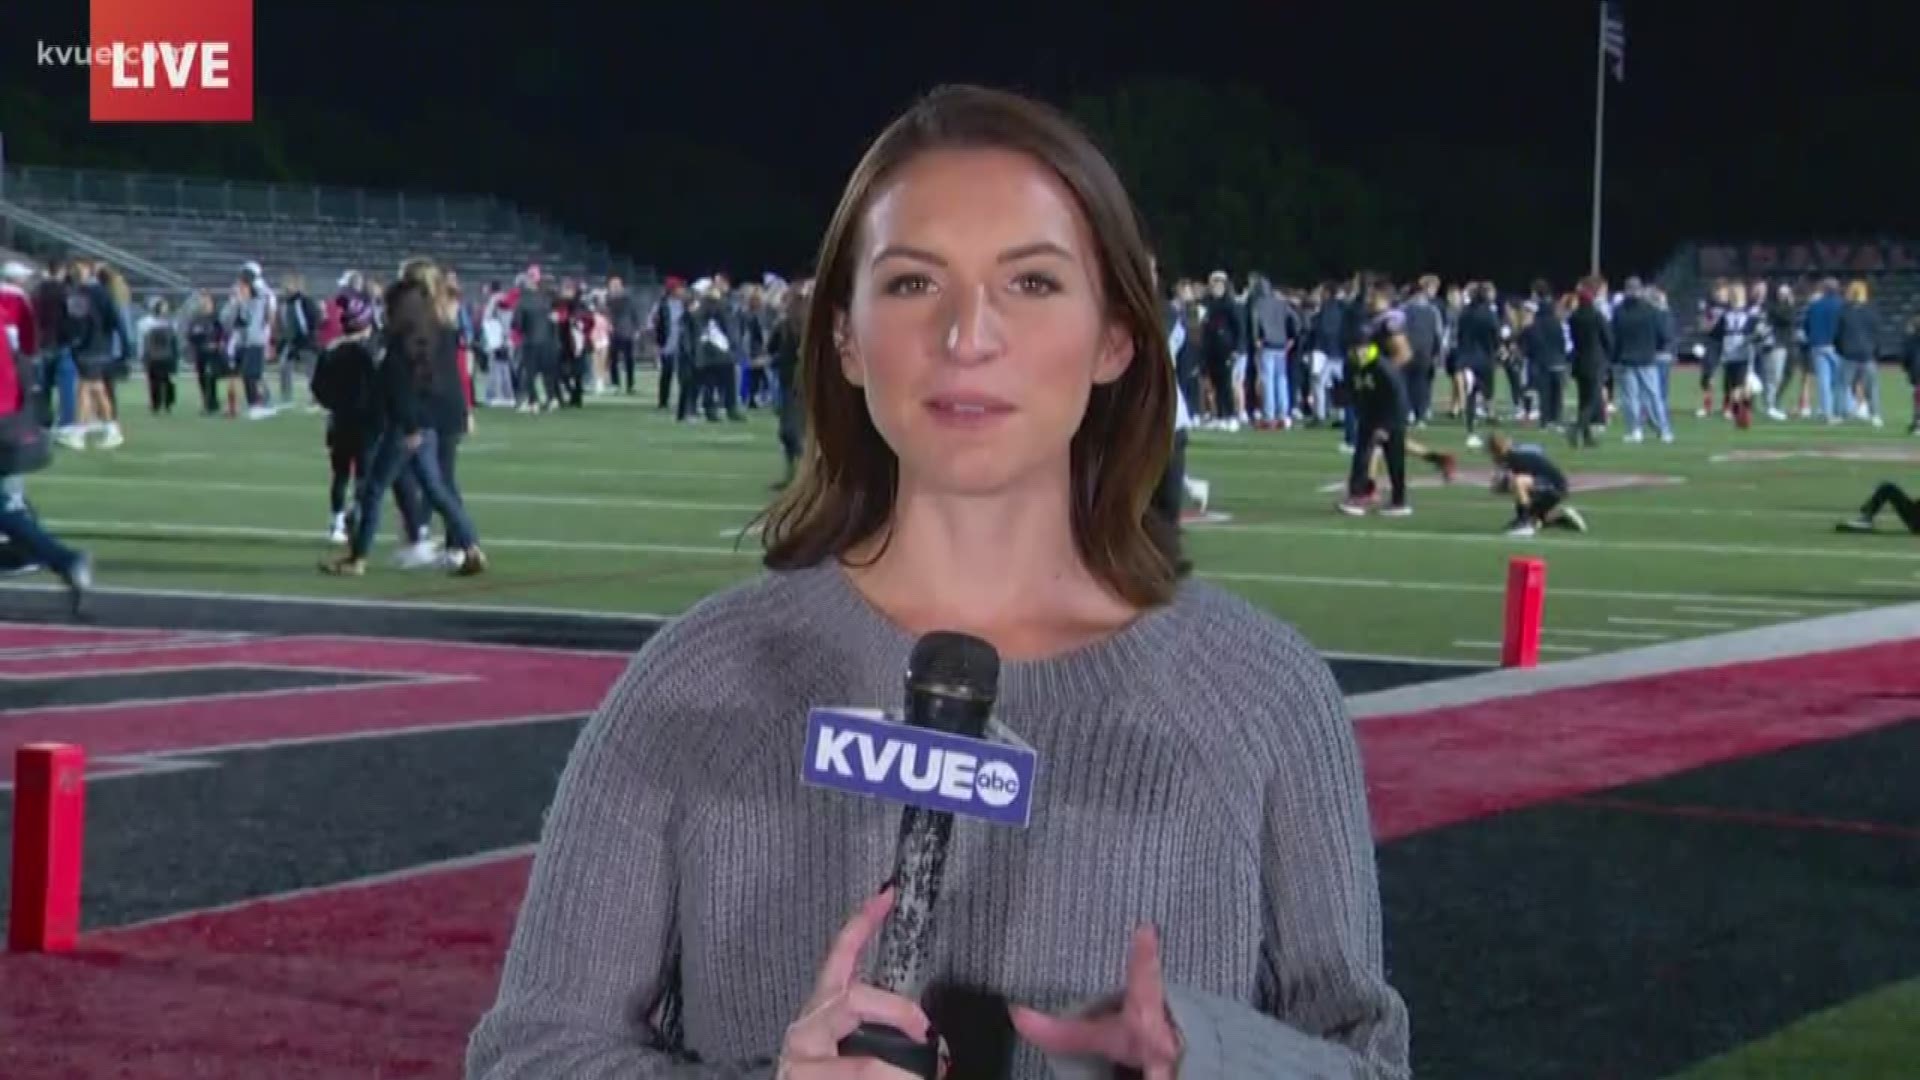 KVUE's Emily Giangreco spoke with Lake Travis High School head coach Hank Carter about the Cavaliers' one-point win over Westlake.